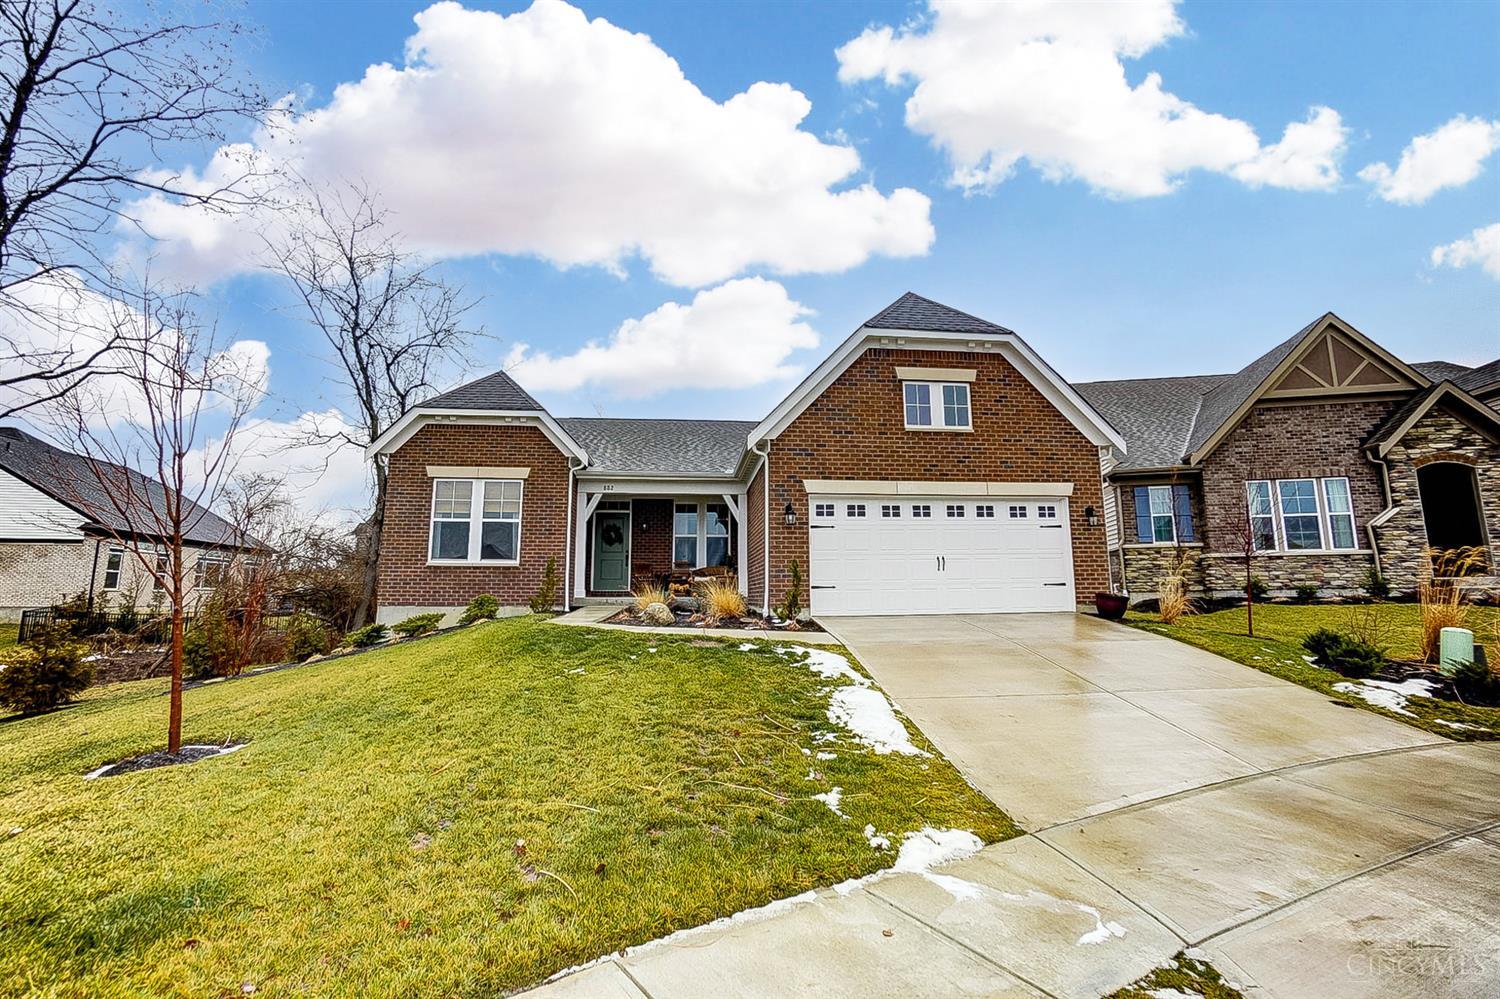 882 Sand Trap Pl., Turtle Creek Twp, OH 